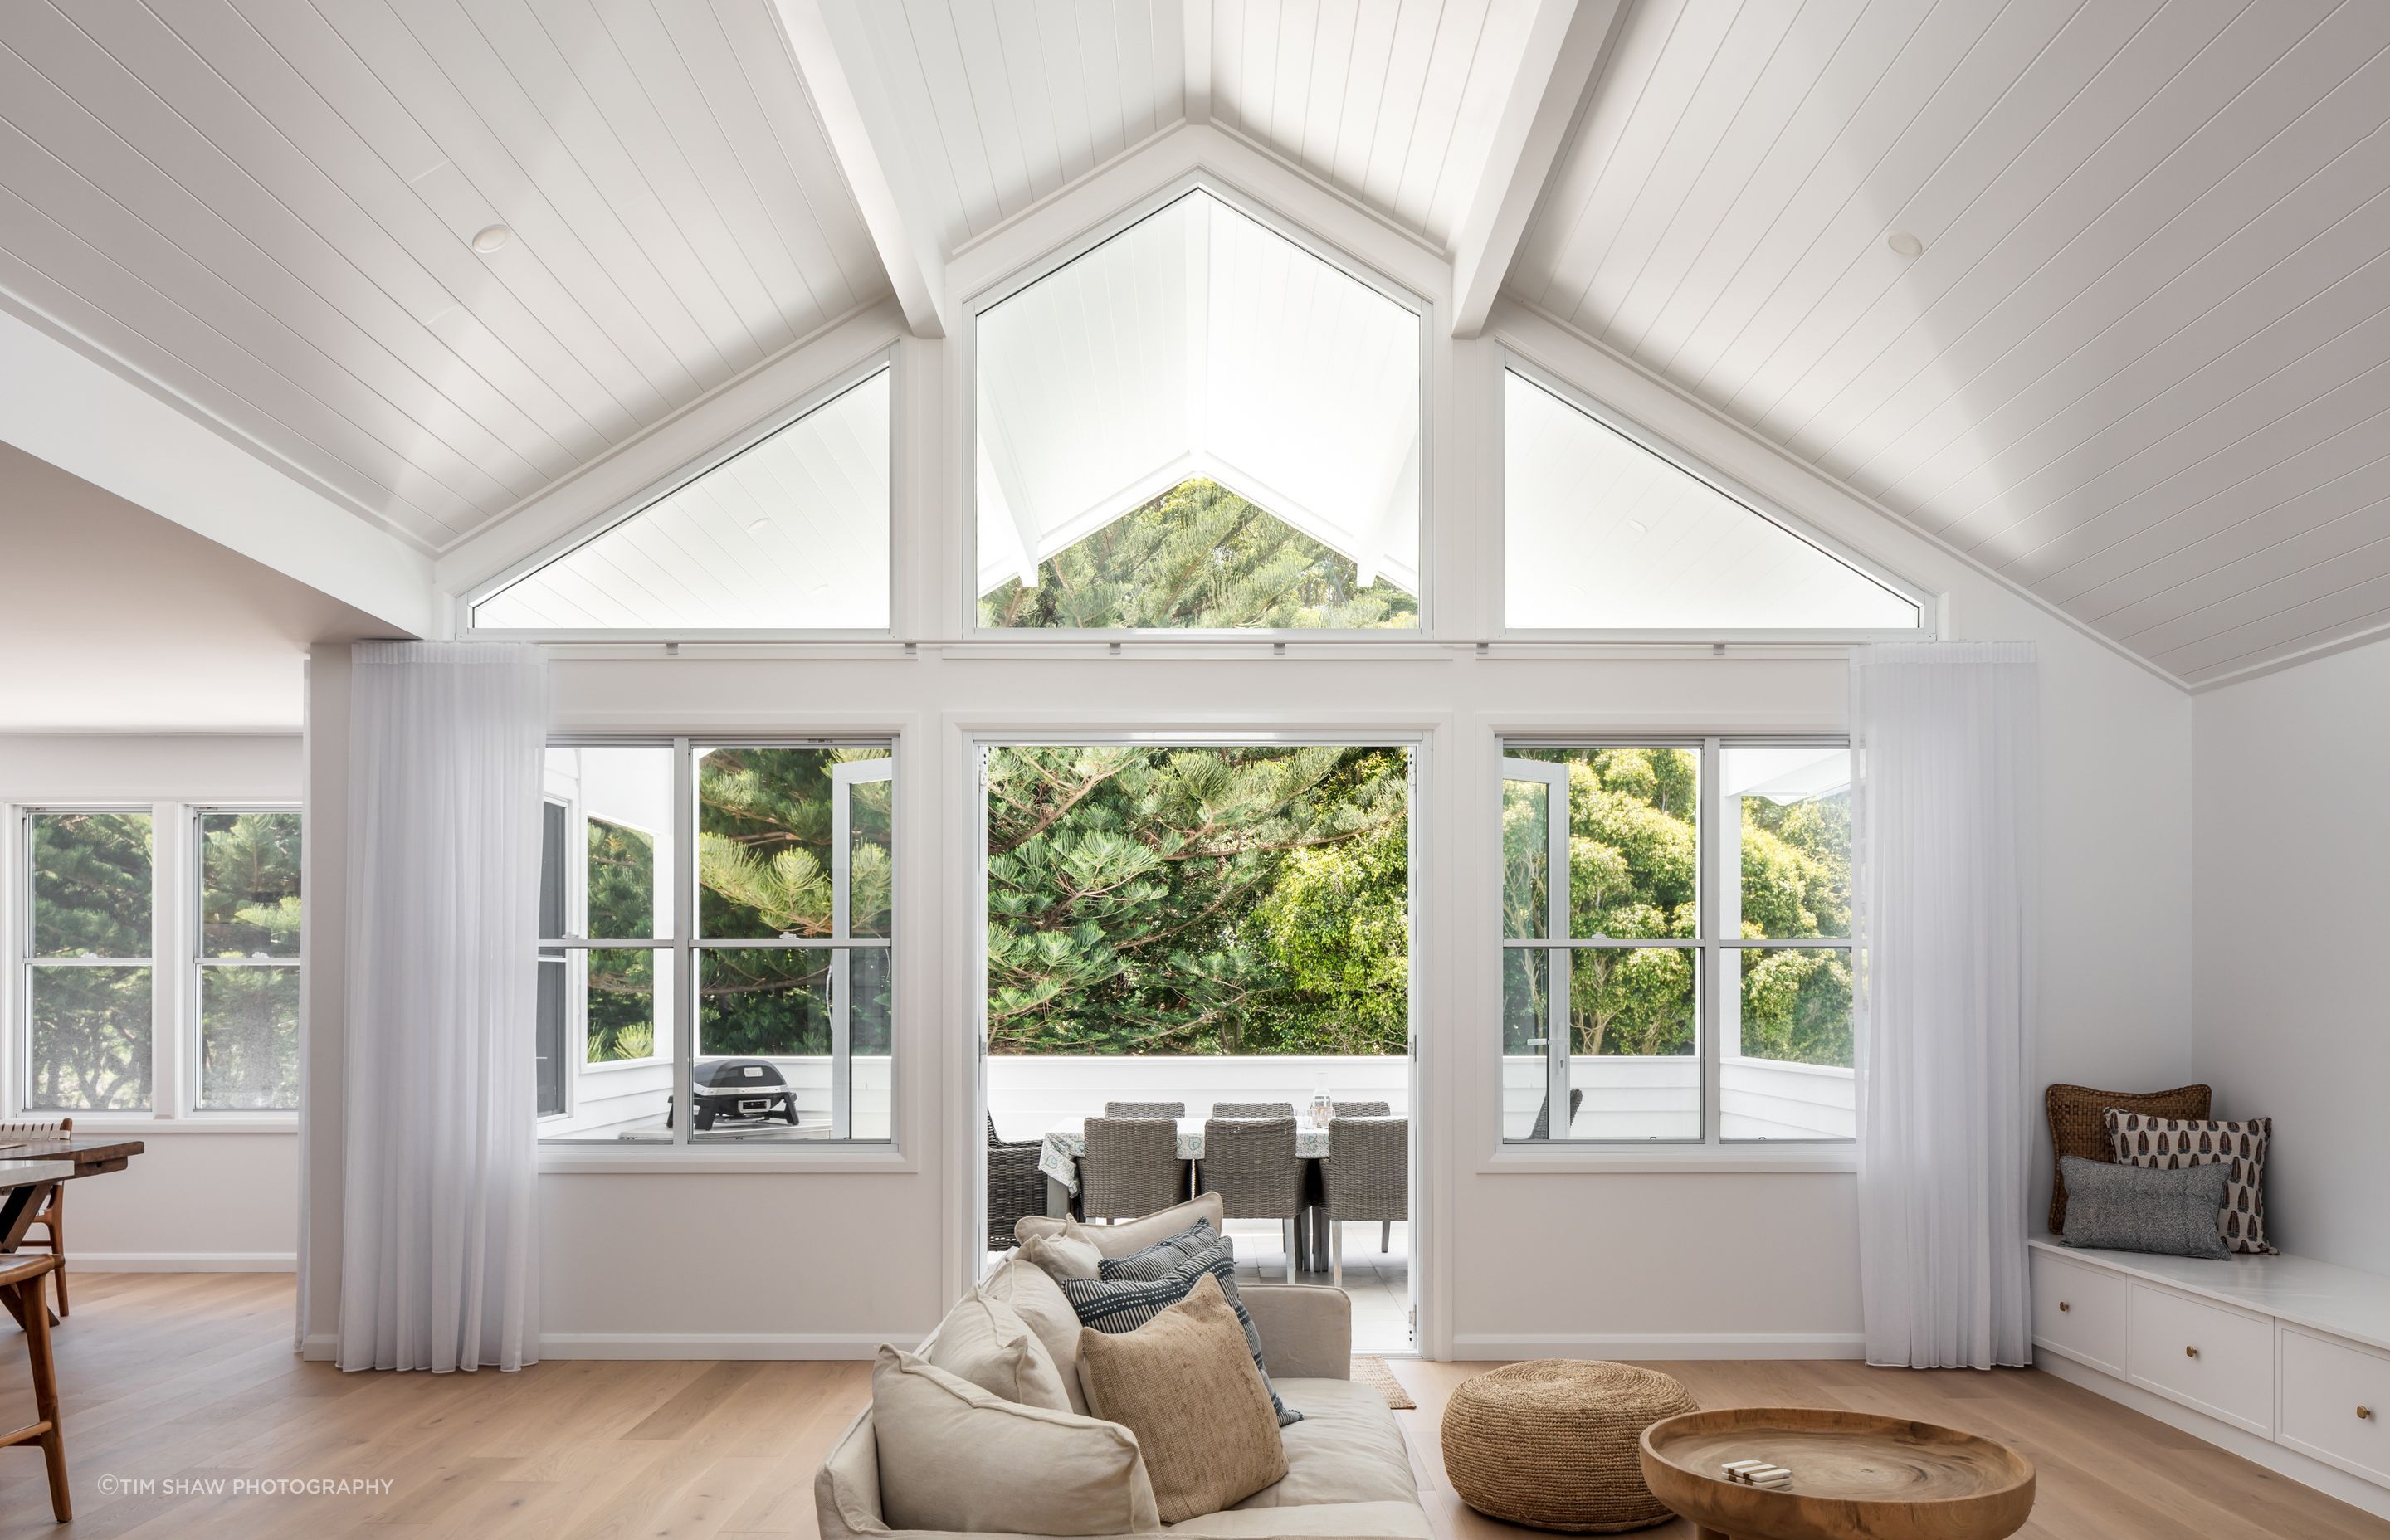 Vast glazing and clerestory windows draw to eye out towards the lush gardens.